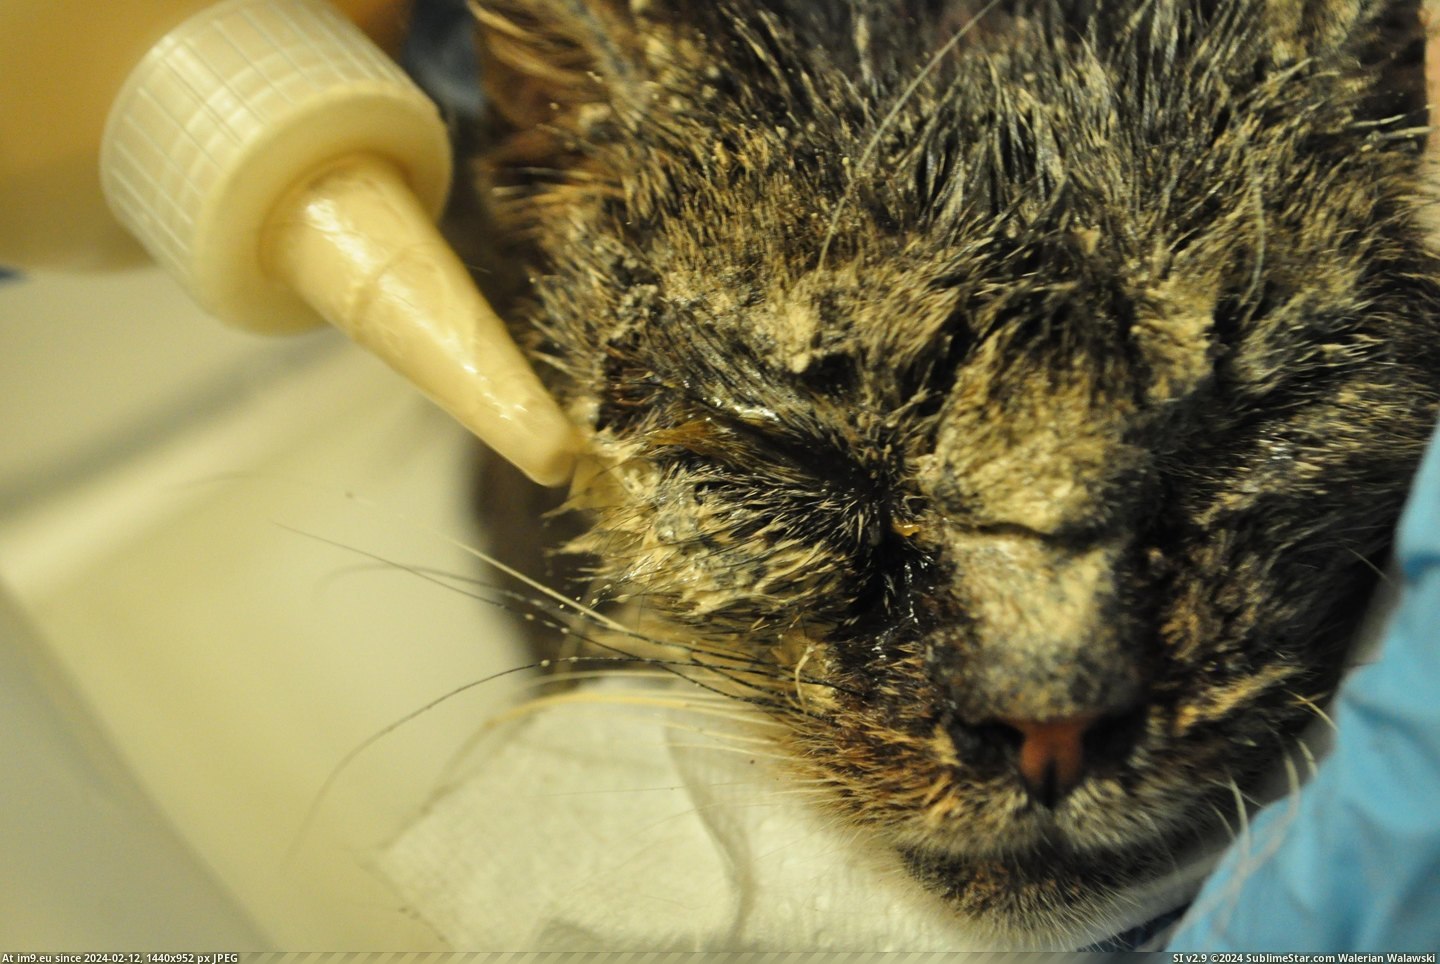 #Cats #Cat #Life #Helped #Dying #Blind #Starved #Kitten #Stray #Save [Cats] Mr. Cat - The Dying, Starved, and Blind Stray Kitten we found, and how Reddit helped save his life. 1 Pic. (Image of album My r/CATS favs))